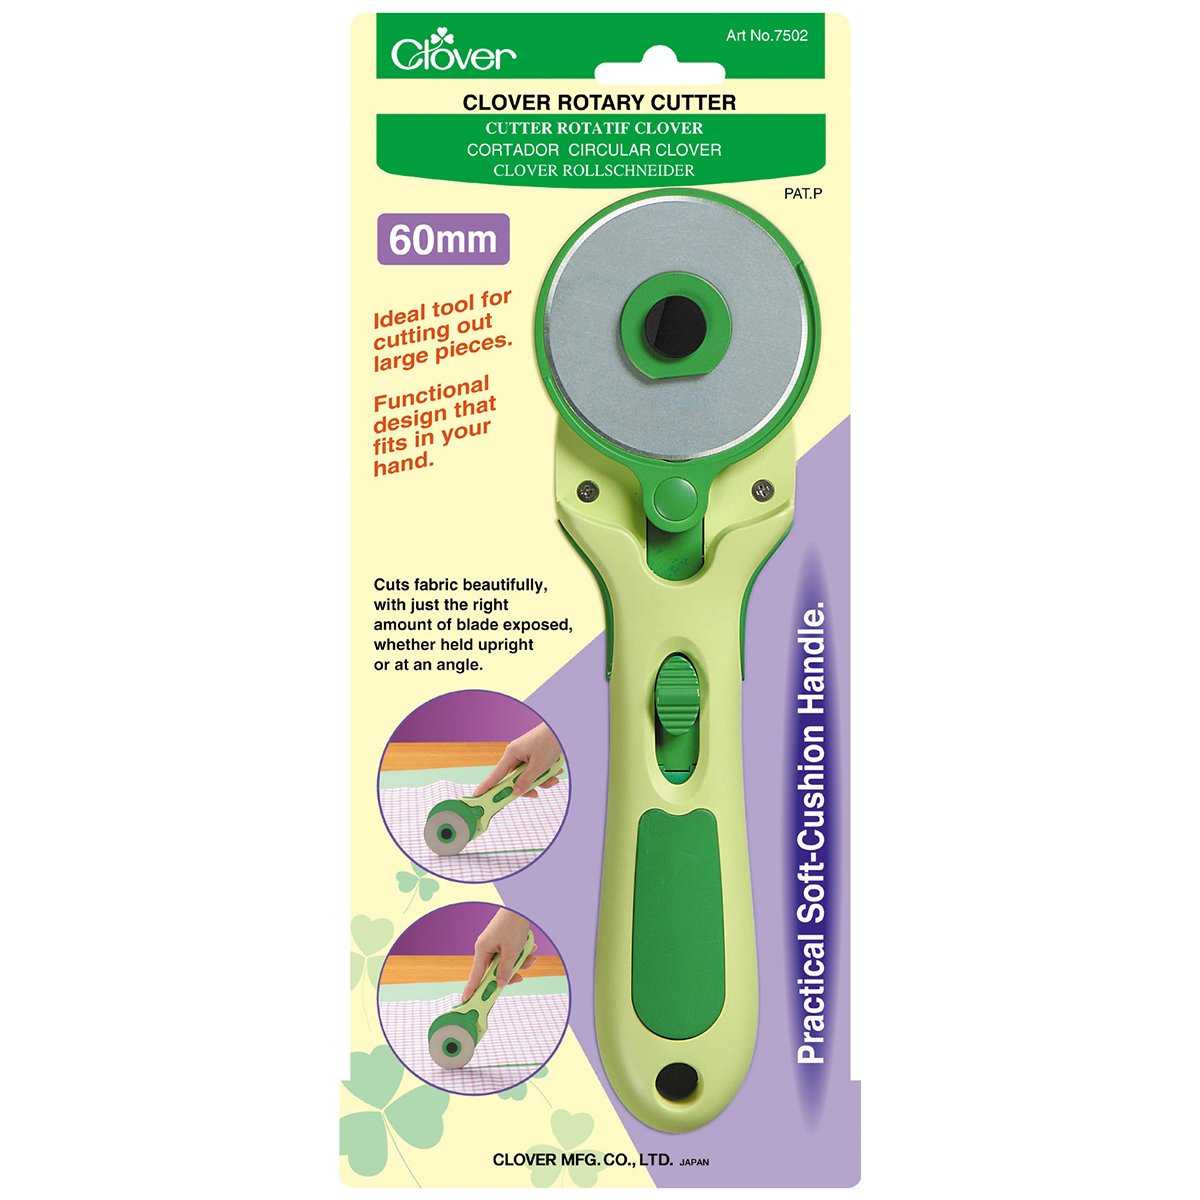 CLV - Rotary Cutter (60mm)